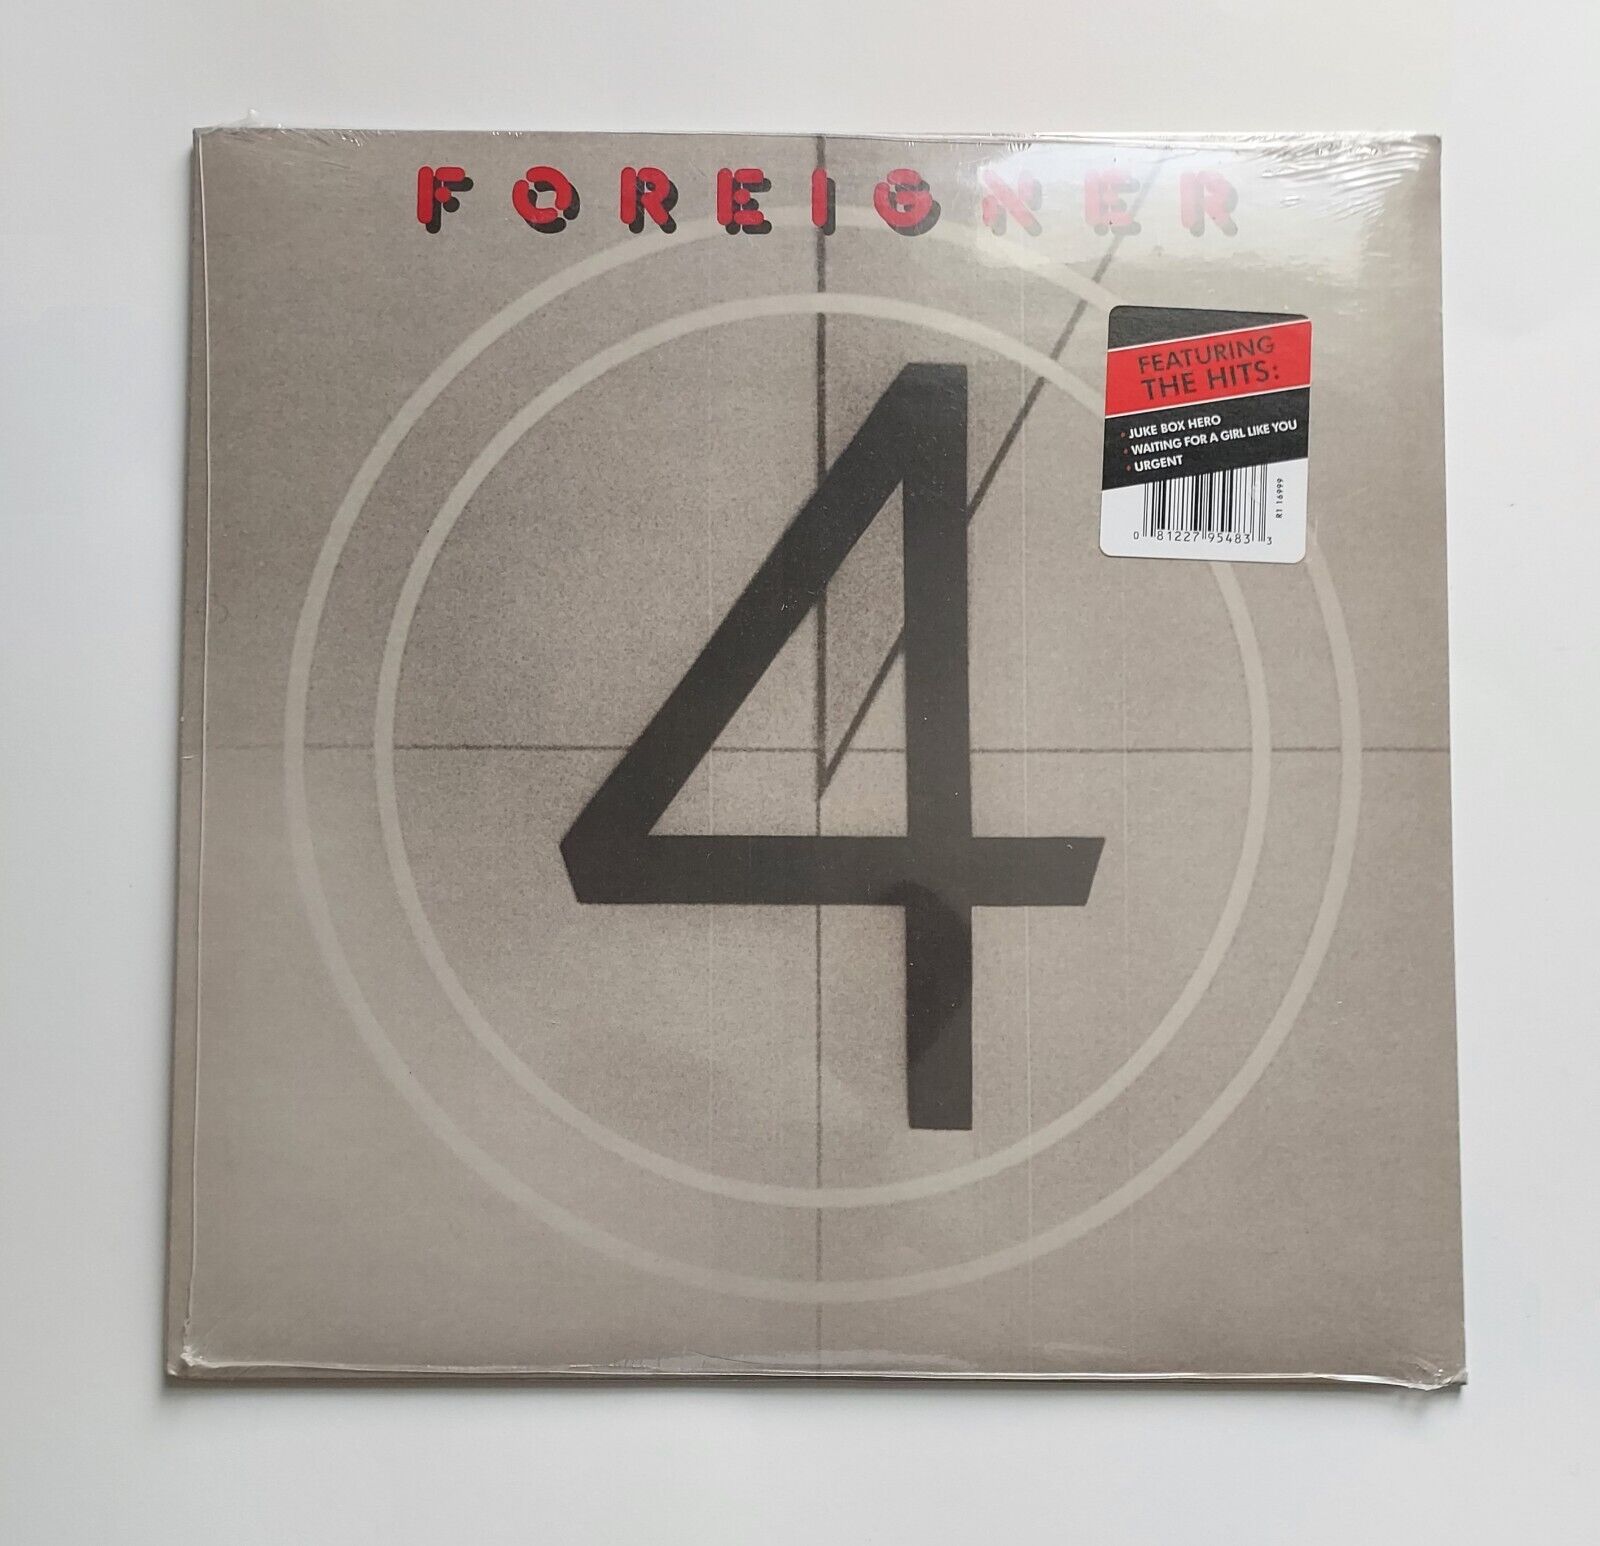 4 by Foreigner (Vinyl Record, 2015, Atlantic) Free Shipping!